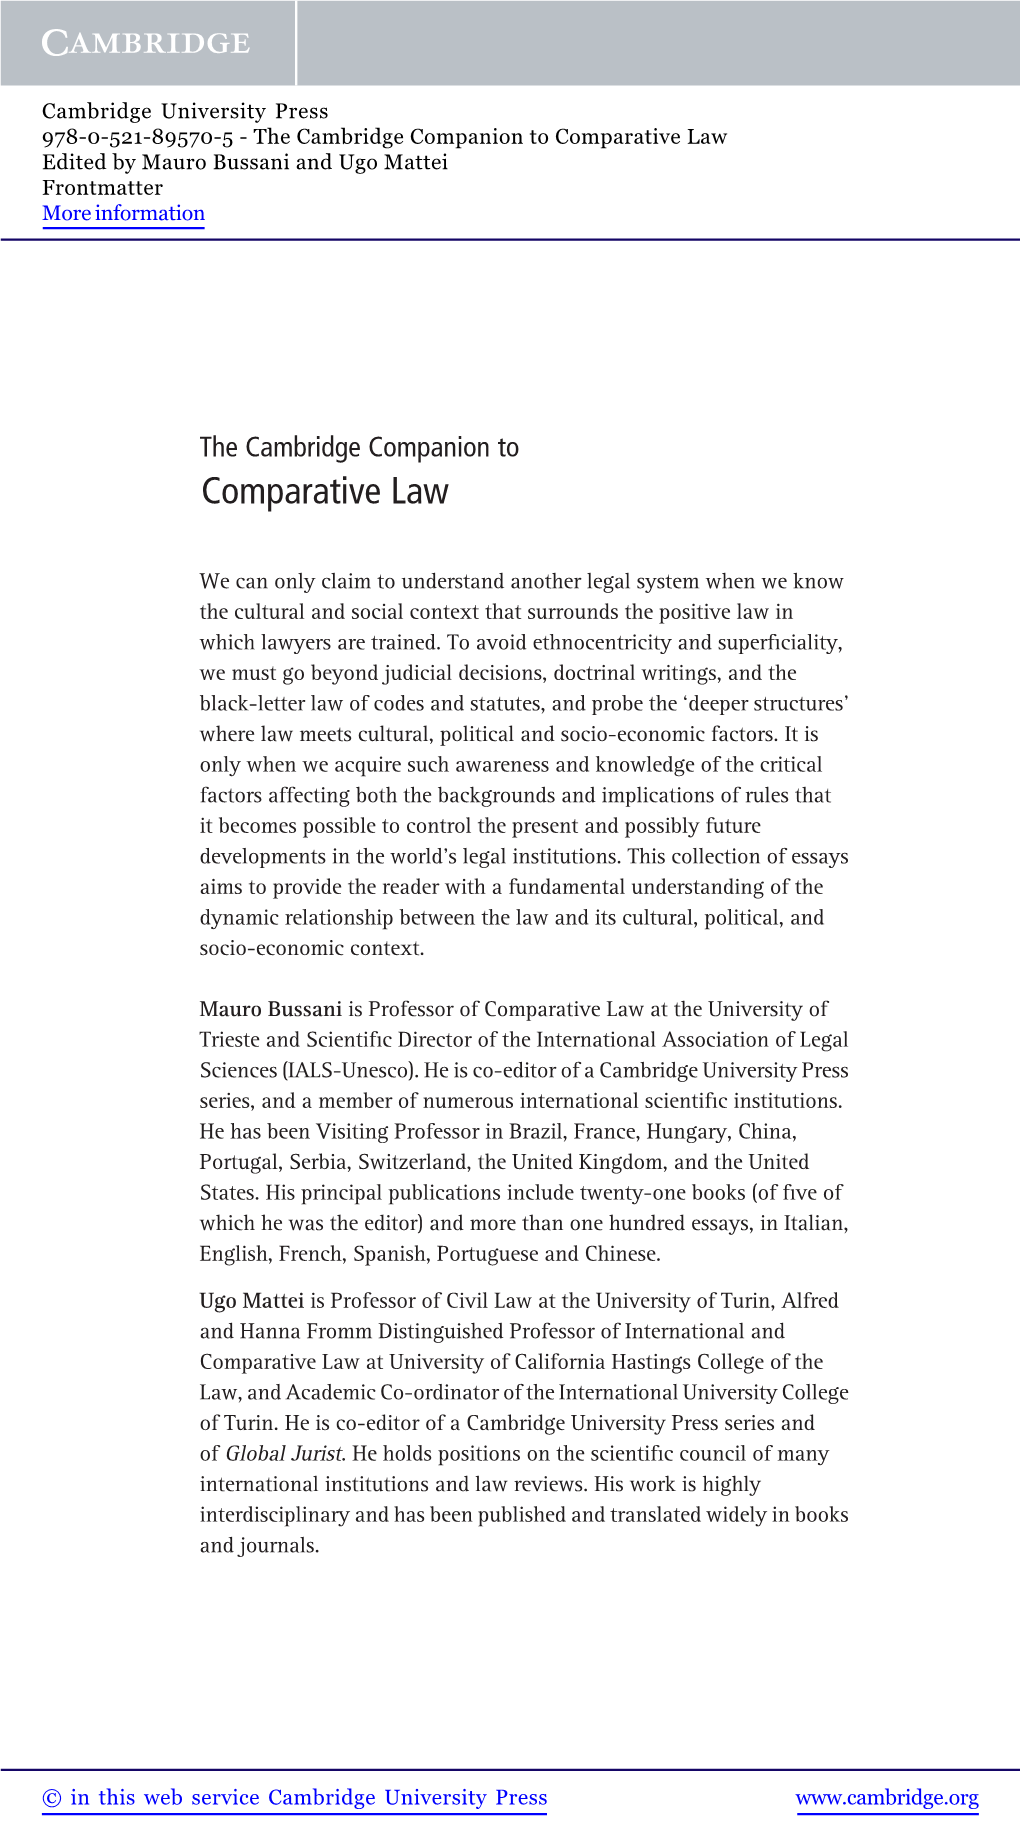 Comparative Law Edited by Mauro Bussani and Ugo Mattei Frontmatter More Information